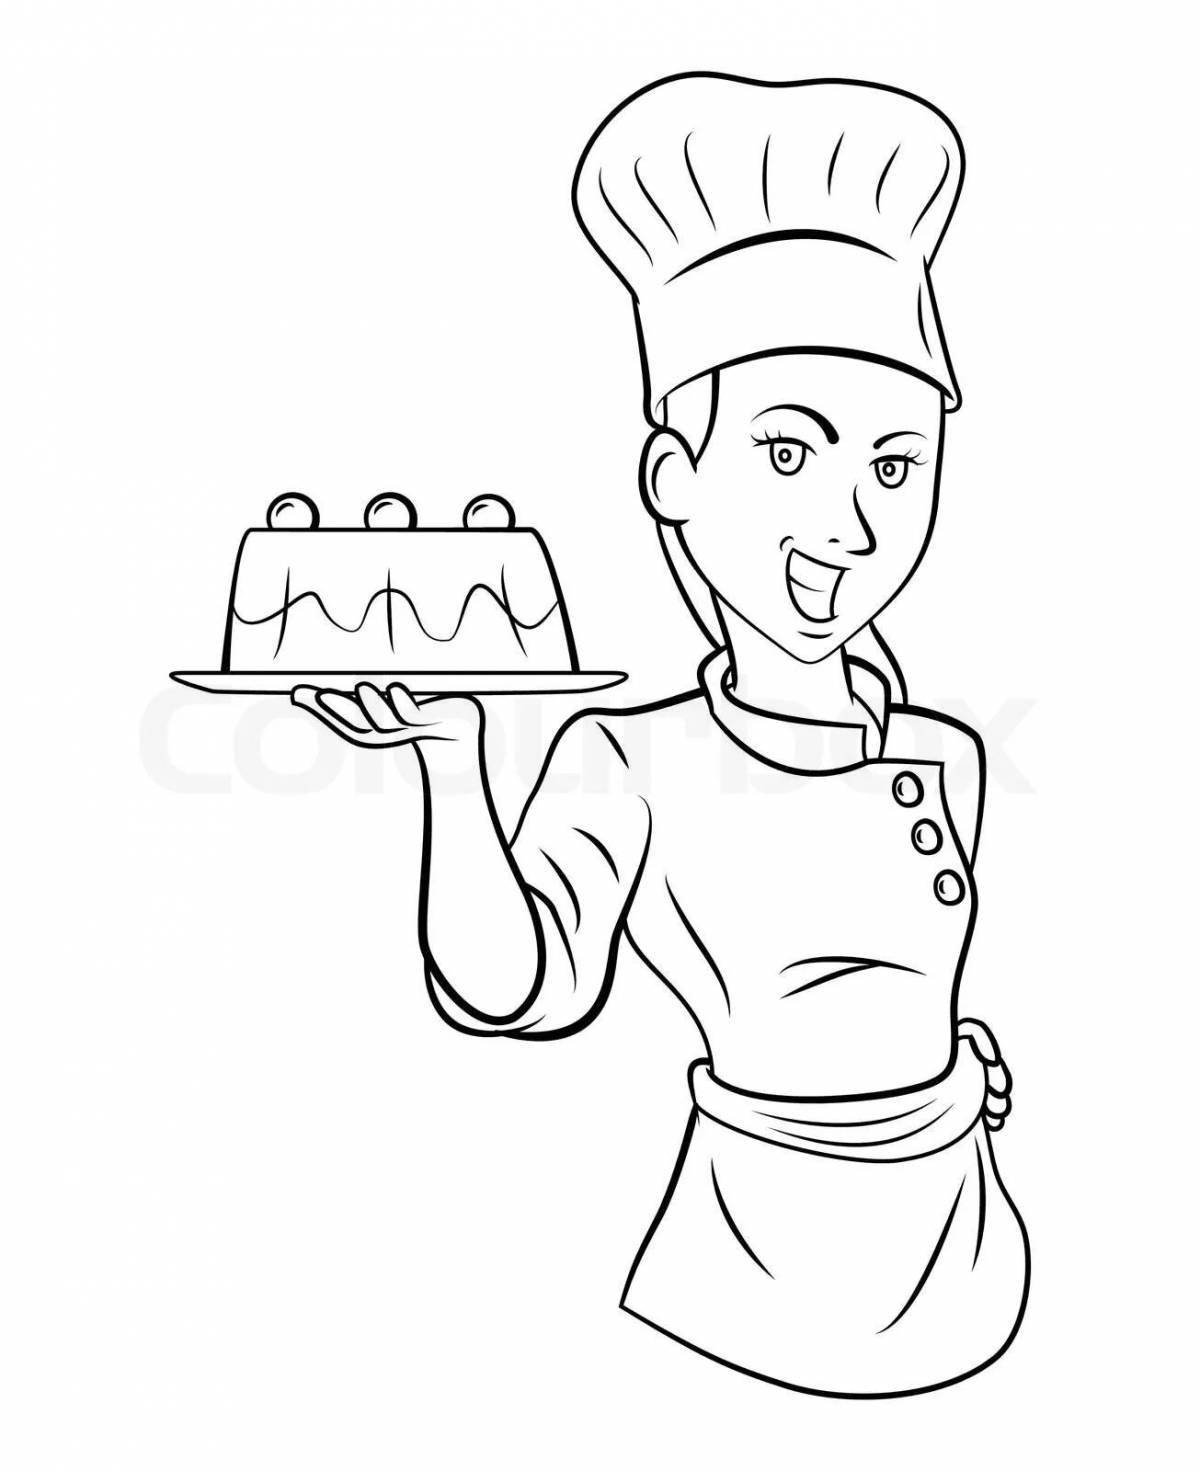 Coloring book pastry chef with color filling